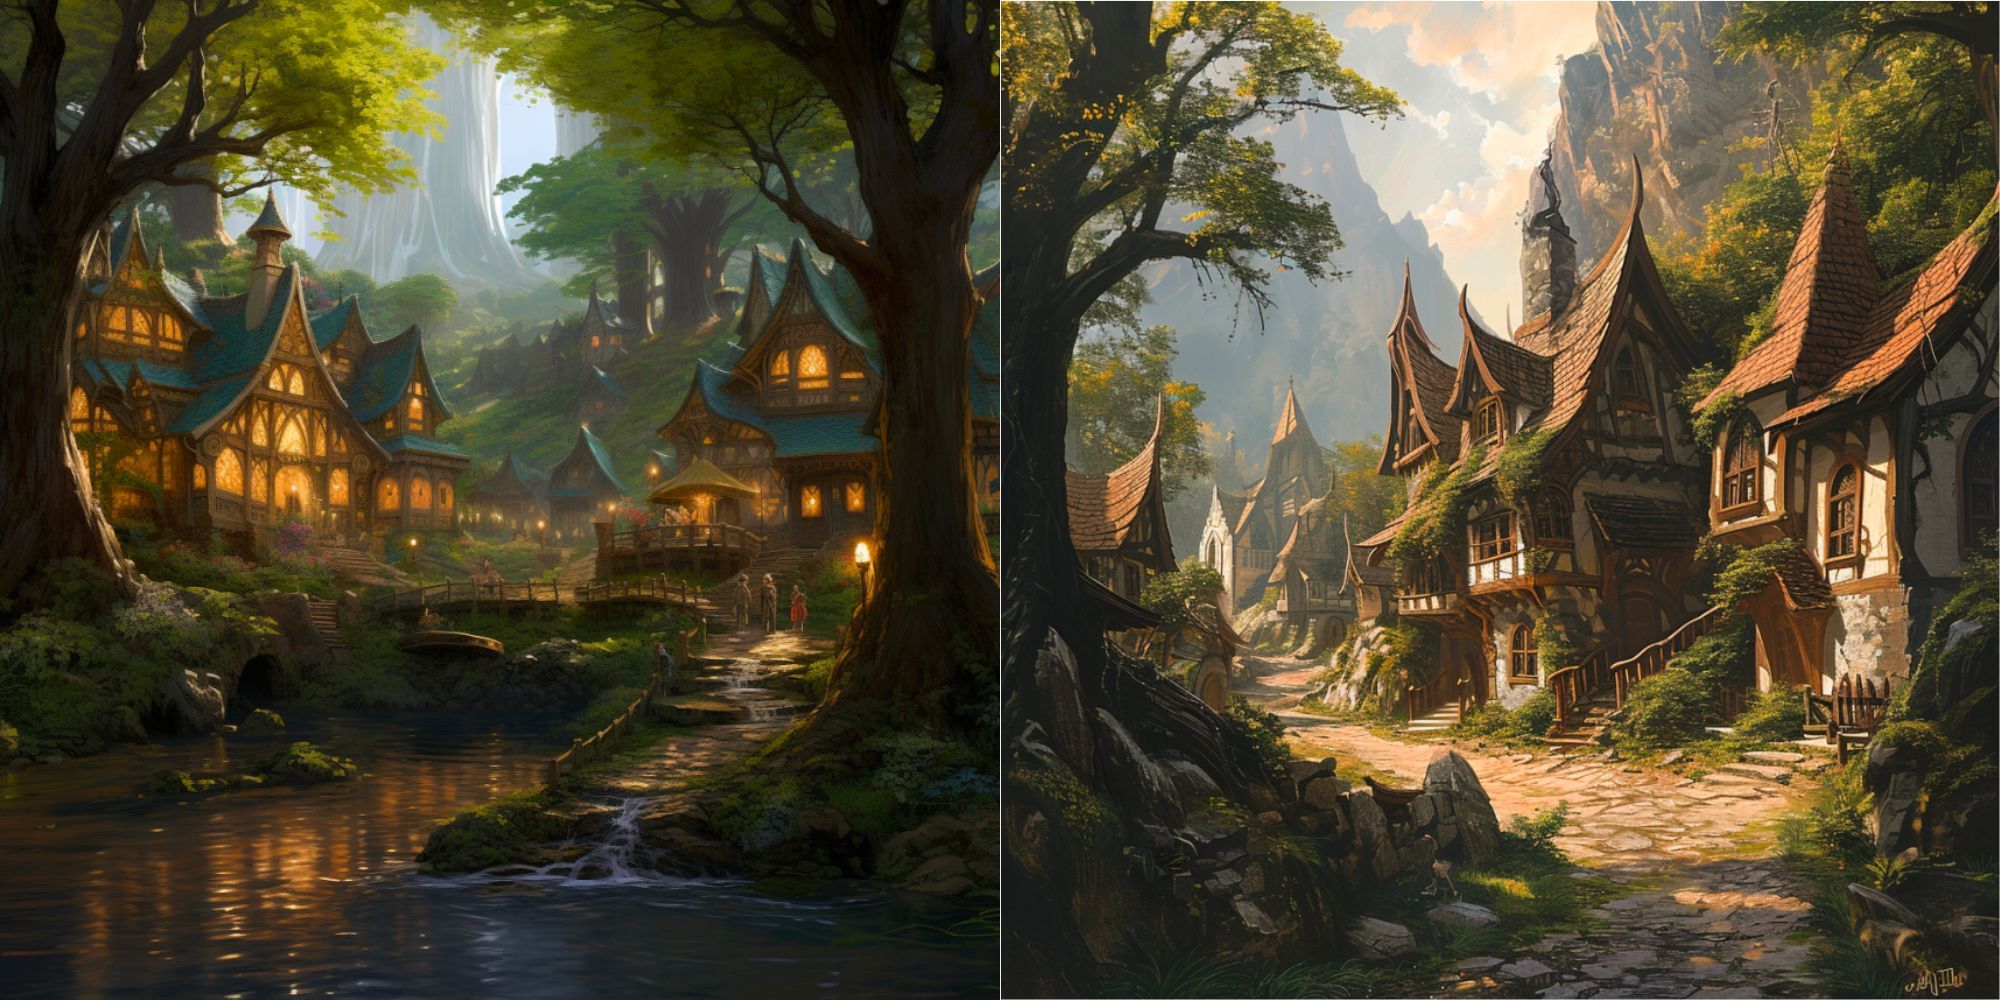 Two side-by-side AI-generated images of idyllic elven villages featuring whimsical houses and lush greenery.